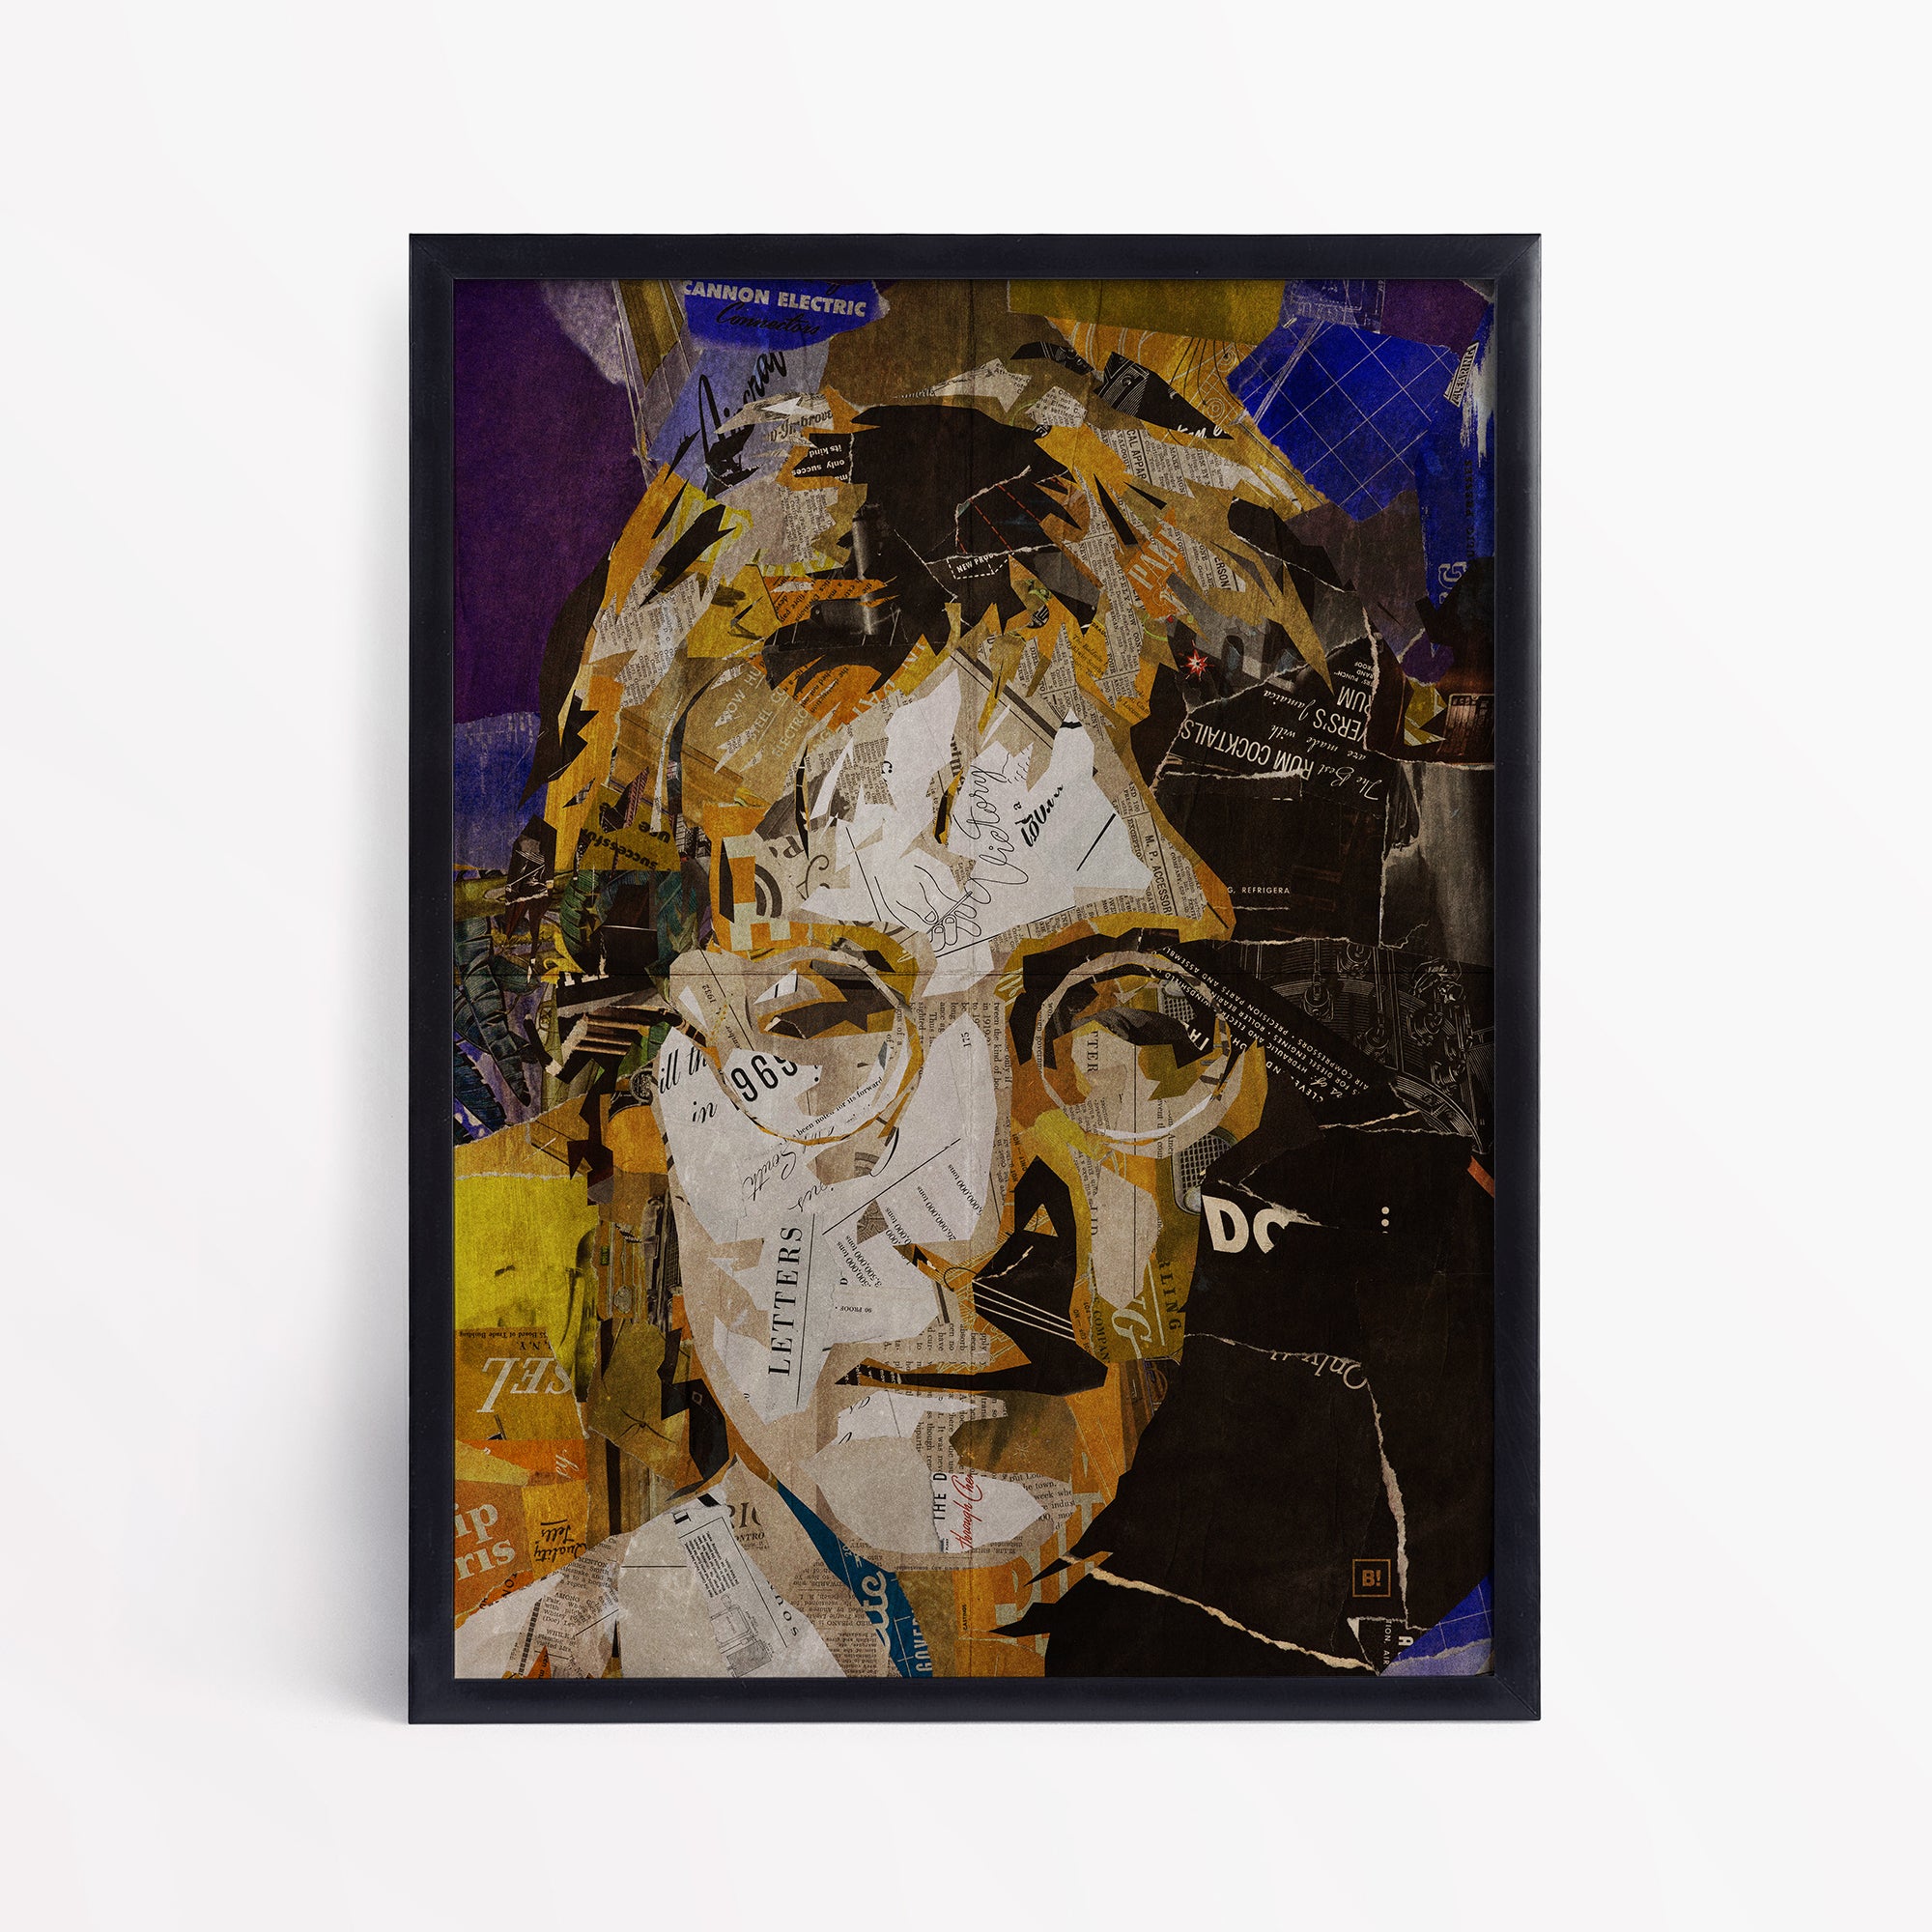 Be inspired by our iconic collage portrait art print of John Lennon. This artwork has been printed using the giclée process on archival acid-free paper and is presented in a sleek black frame, showcasing its timeless beauty in every detail.